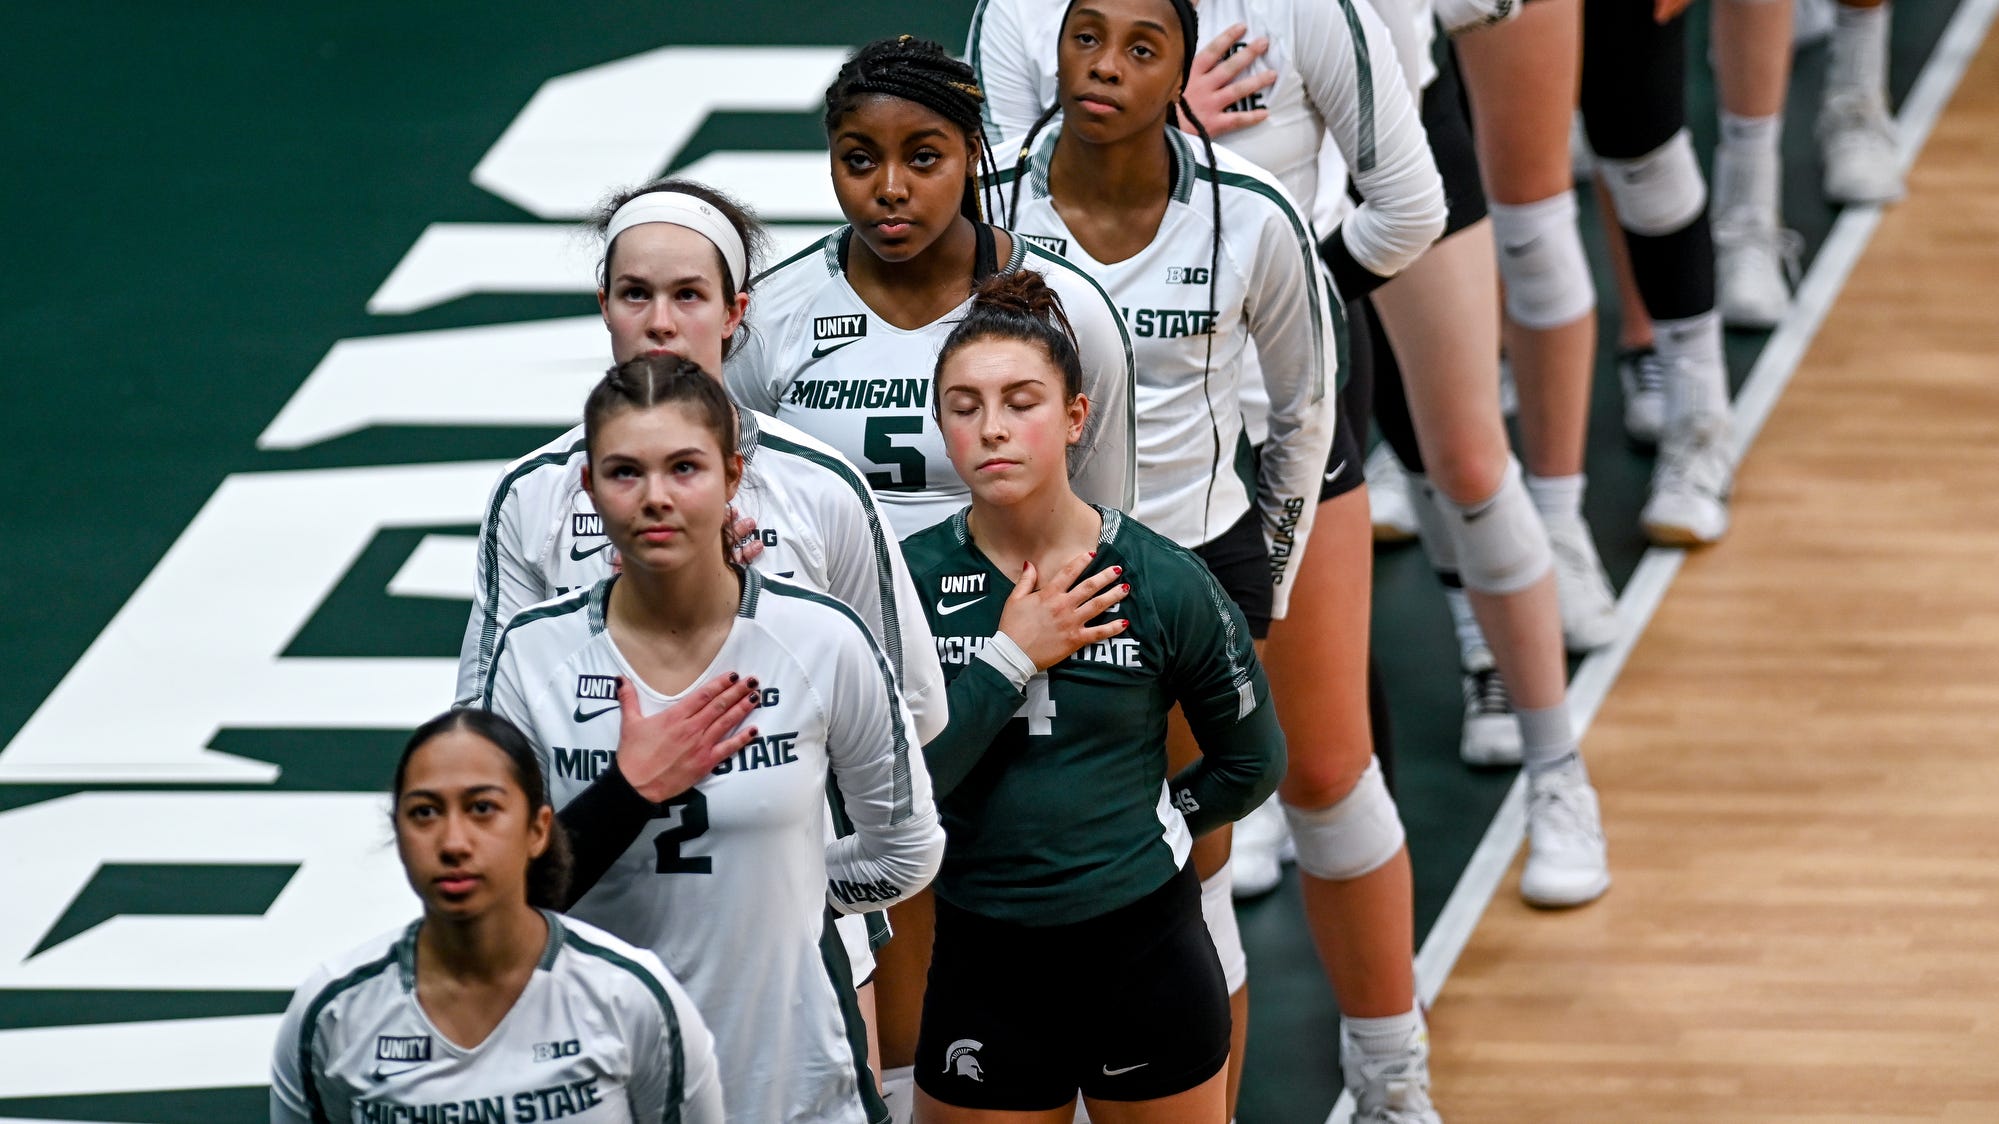 Michigan State volleyball to play home games at Breslin Center in 2022